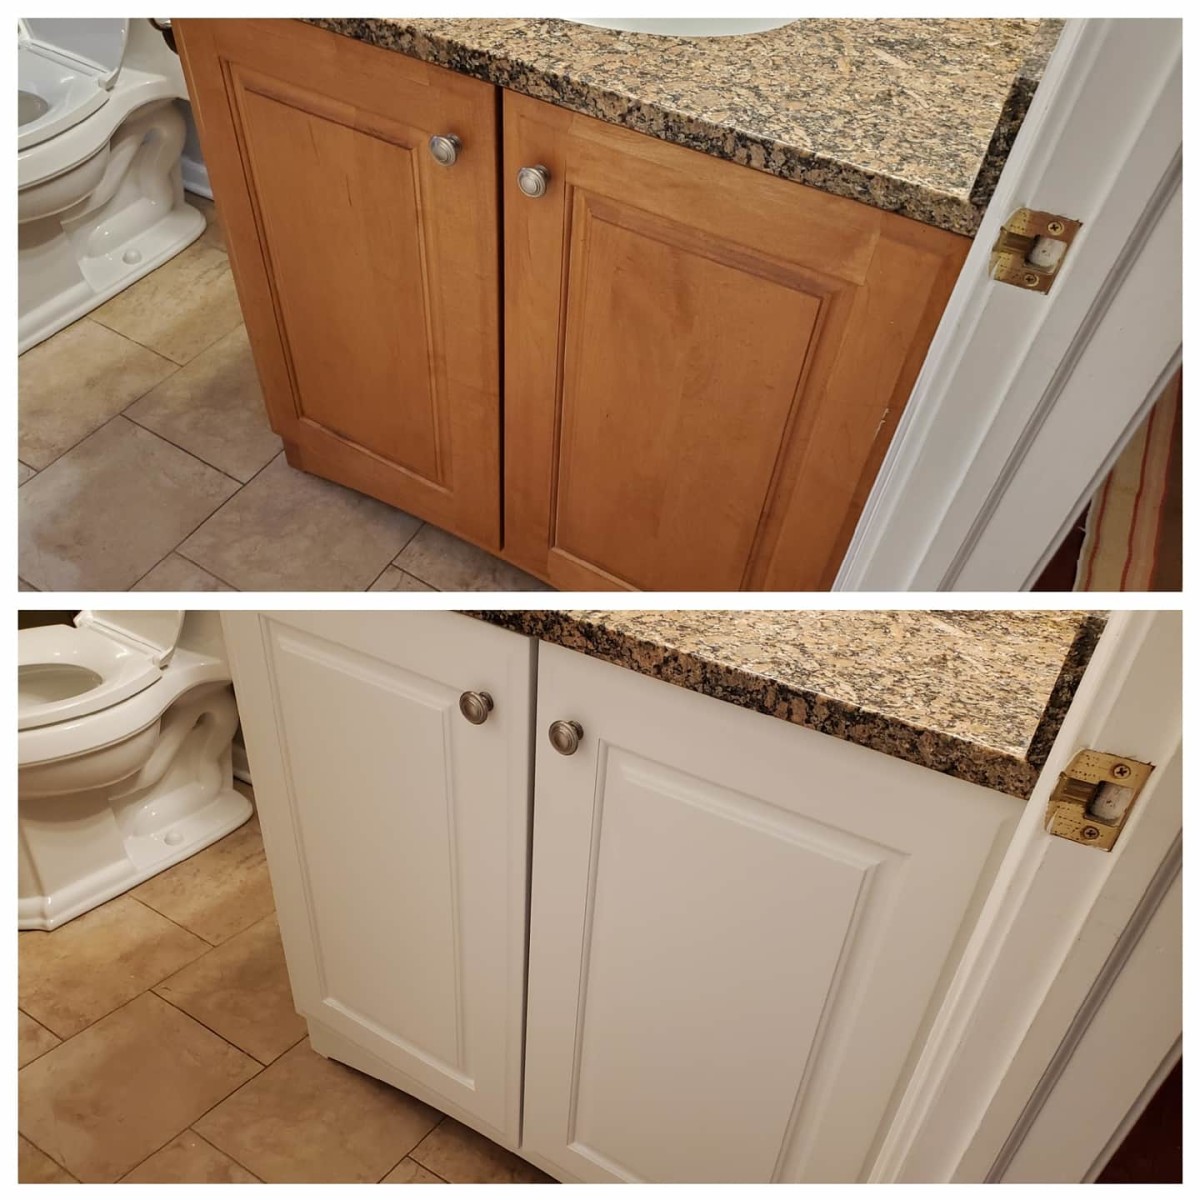 Tips For Painting A Bathroom Vanity, What Paint To Use On Bathroom Vanity